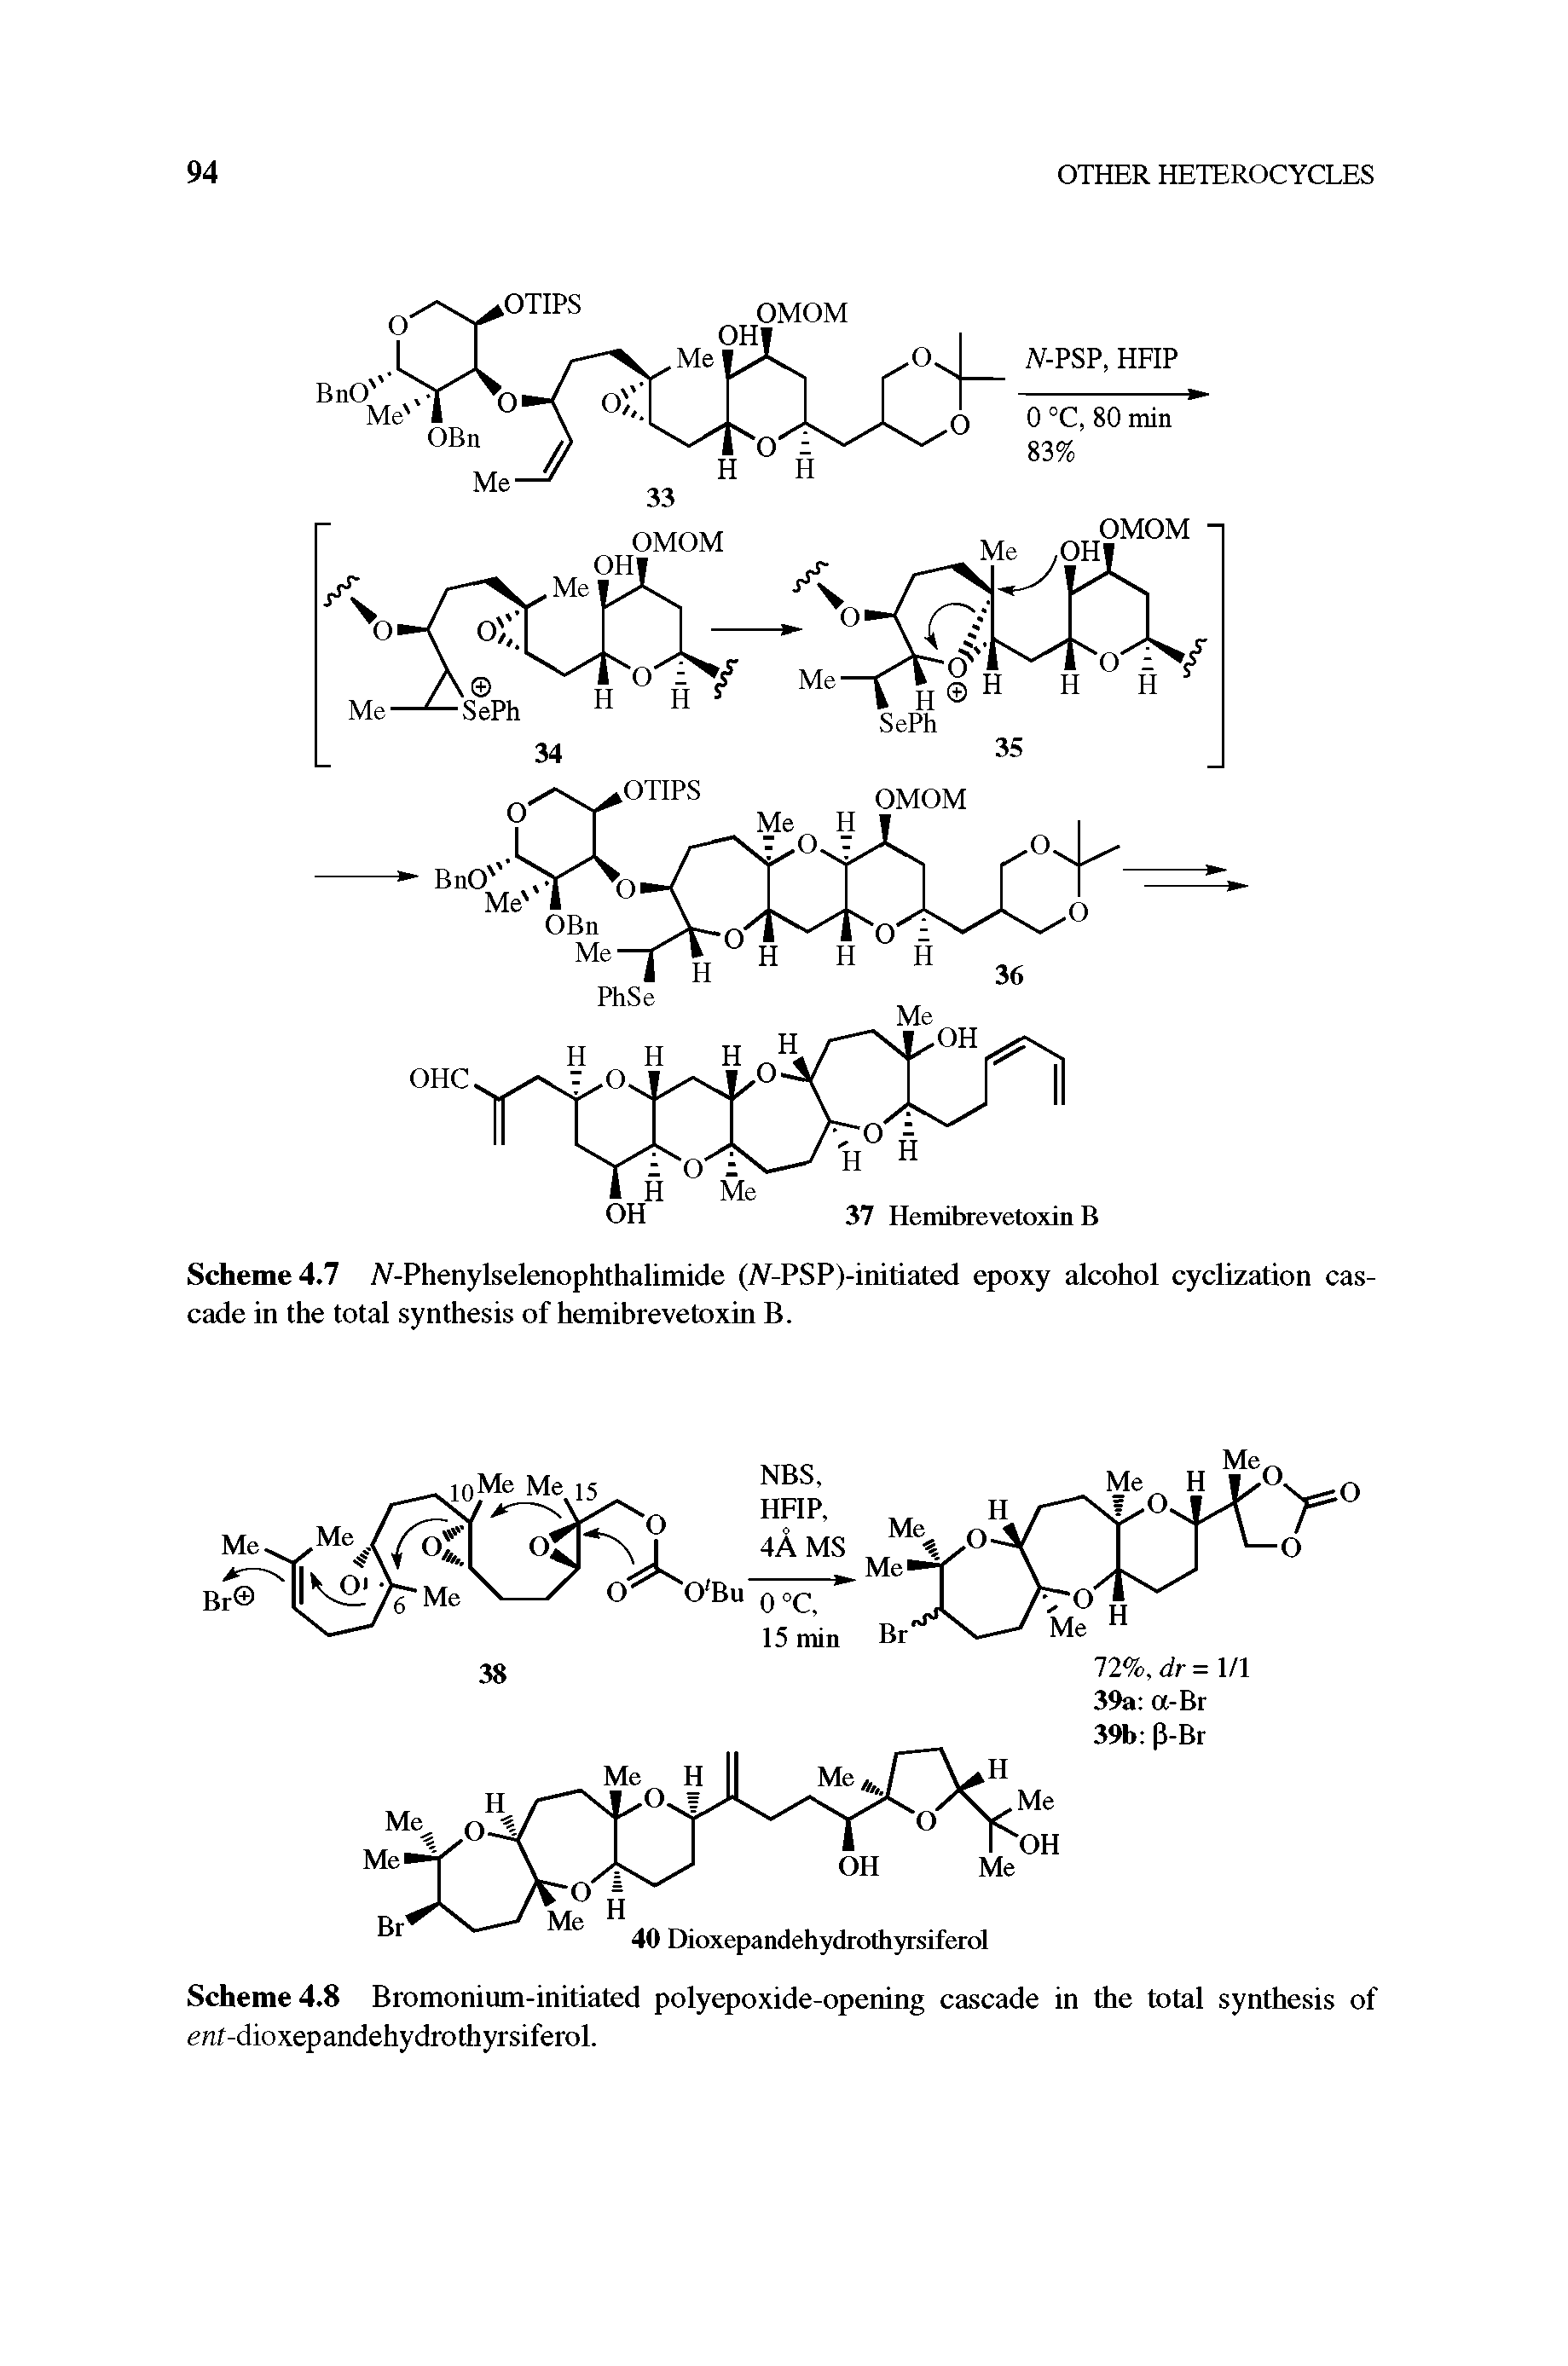 Scheme 4.8 Bromonium-initiated polyepoxide-opening cascade in the total synthesis of ent-dioxepandehydrothyrsiferol.